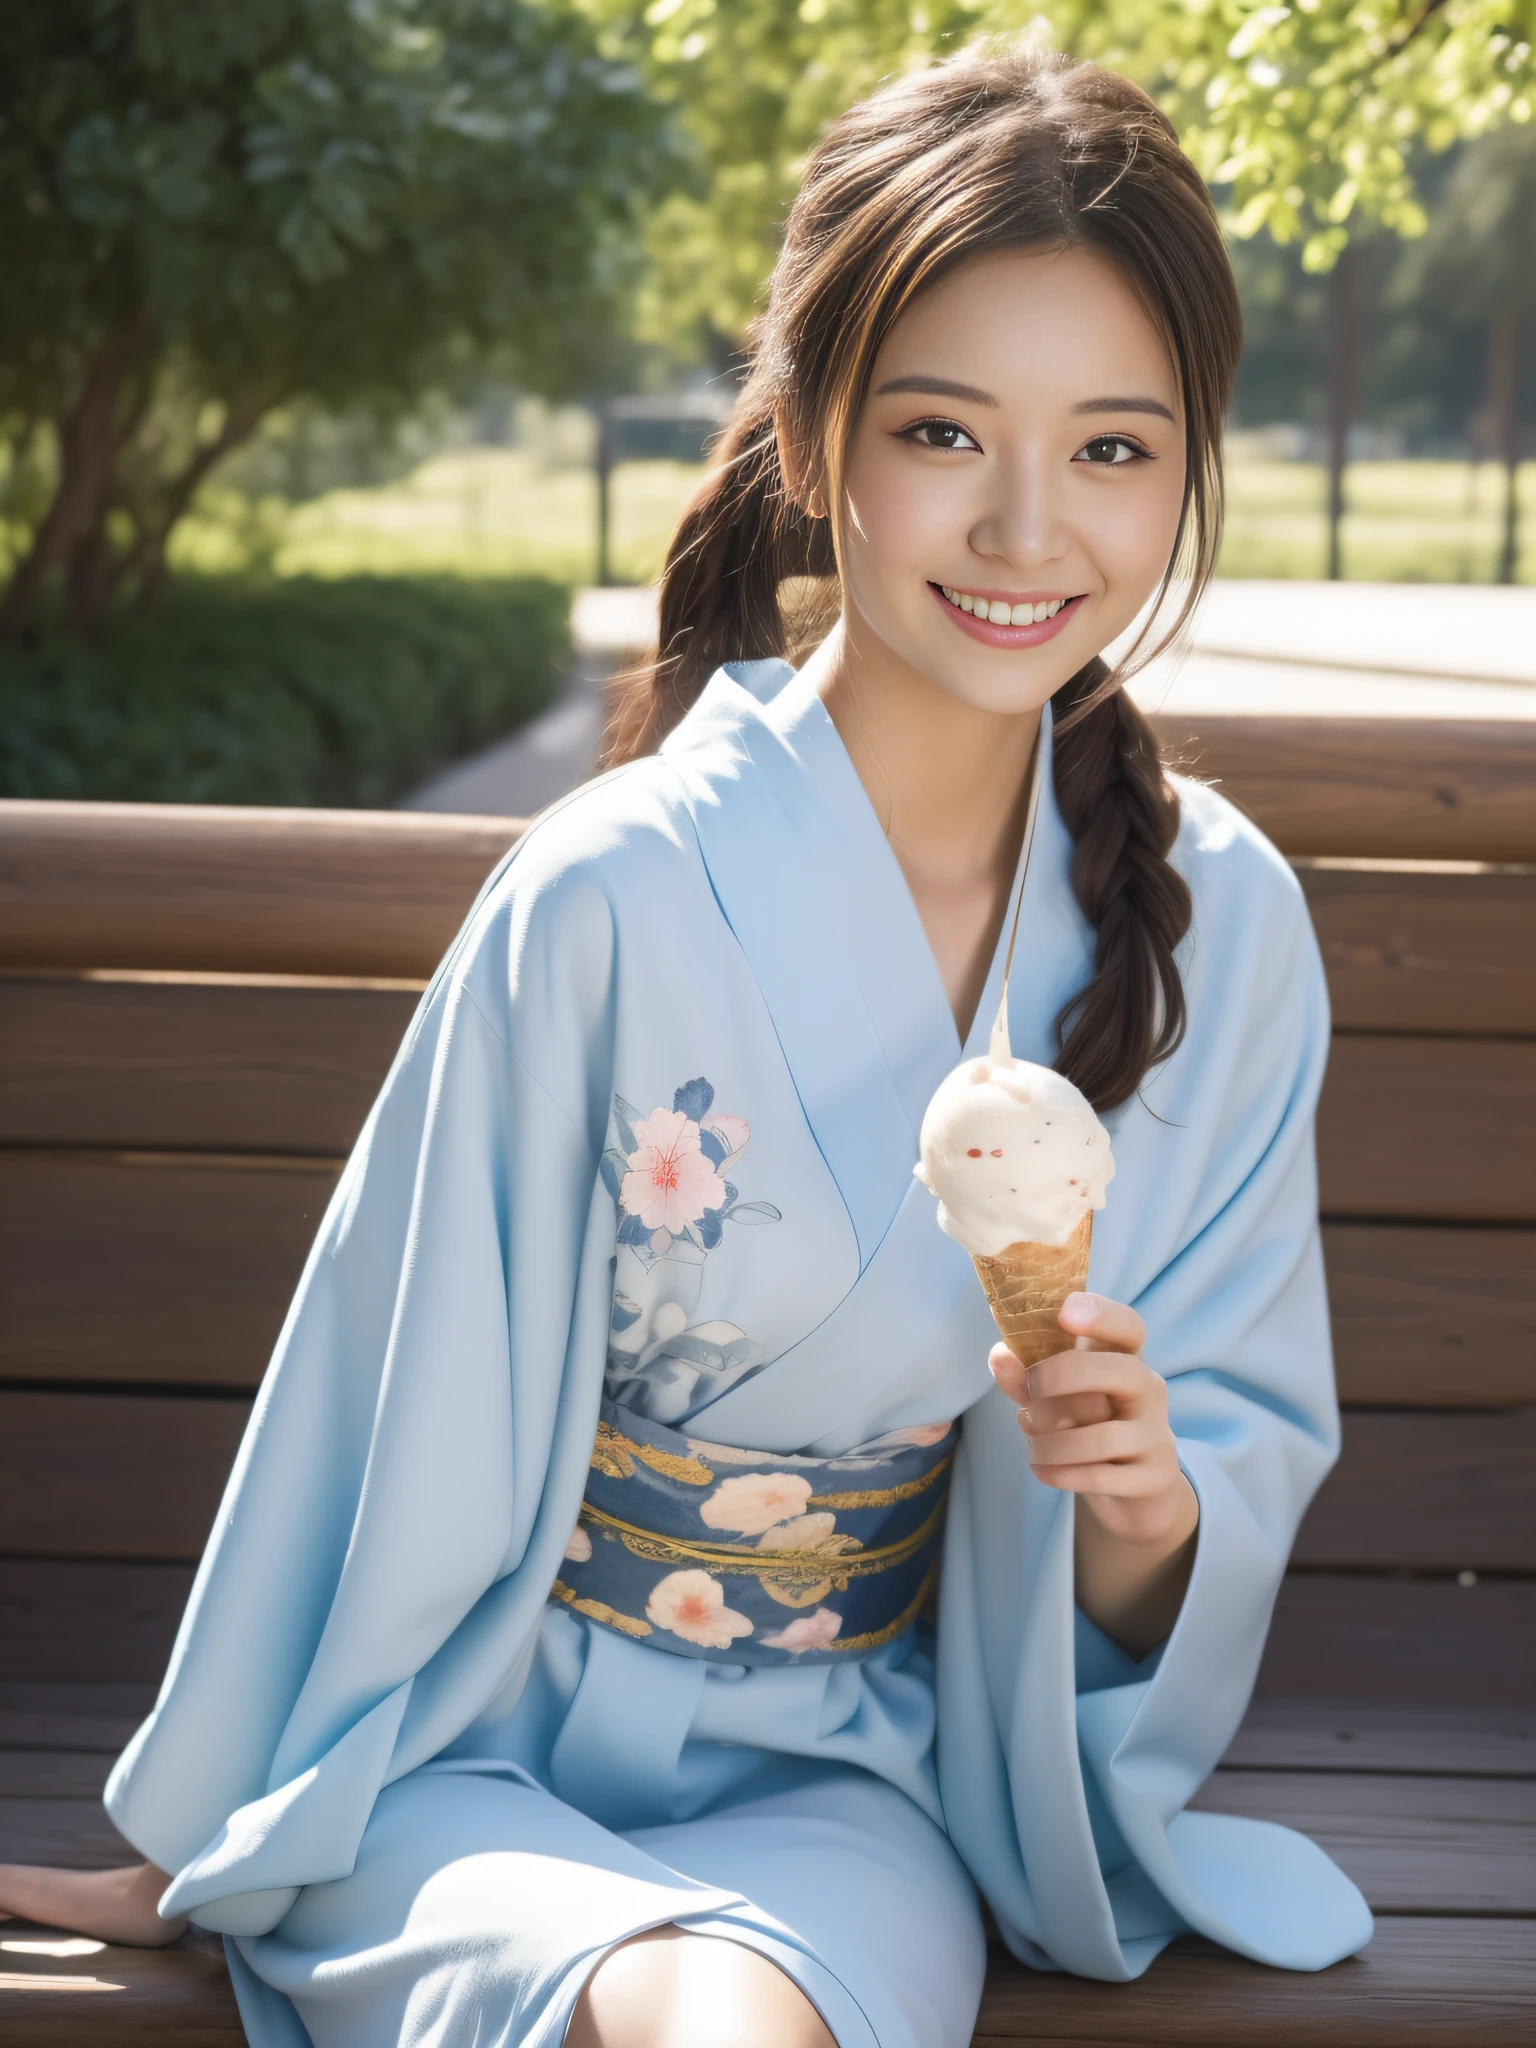 ((beste-Qualit))、((The ultra -The high-definition))finely detail、(((Beautiful One Girl)))、extremely detailed eye and face、Yukata with a light floral pattern、A slight smile、a park、poneyTail、sit on a bench、(((Ice cream)))